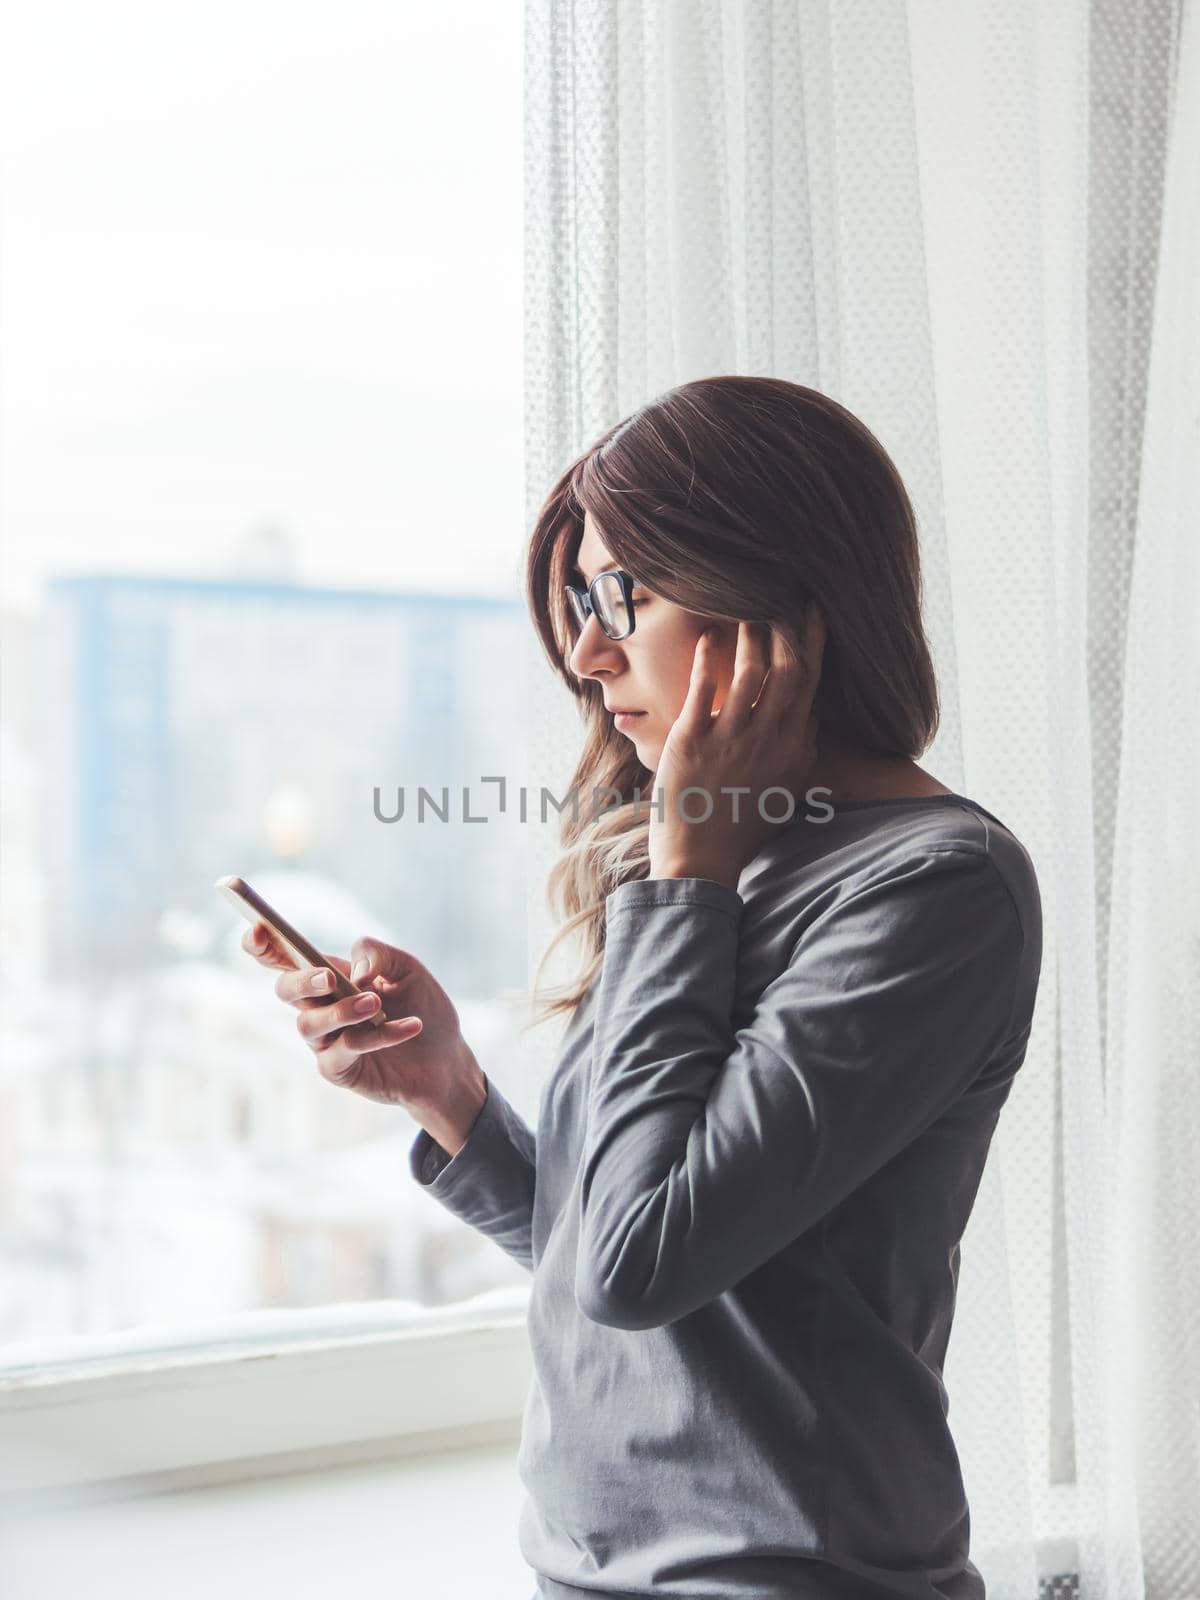 Thoughtful woman with eyeglasses looks at her smartphone. Information in online media. Wireless headphones under hair.